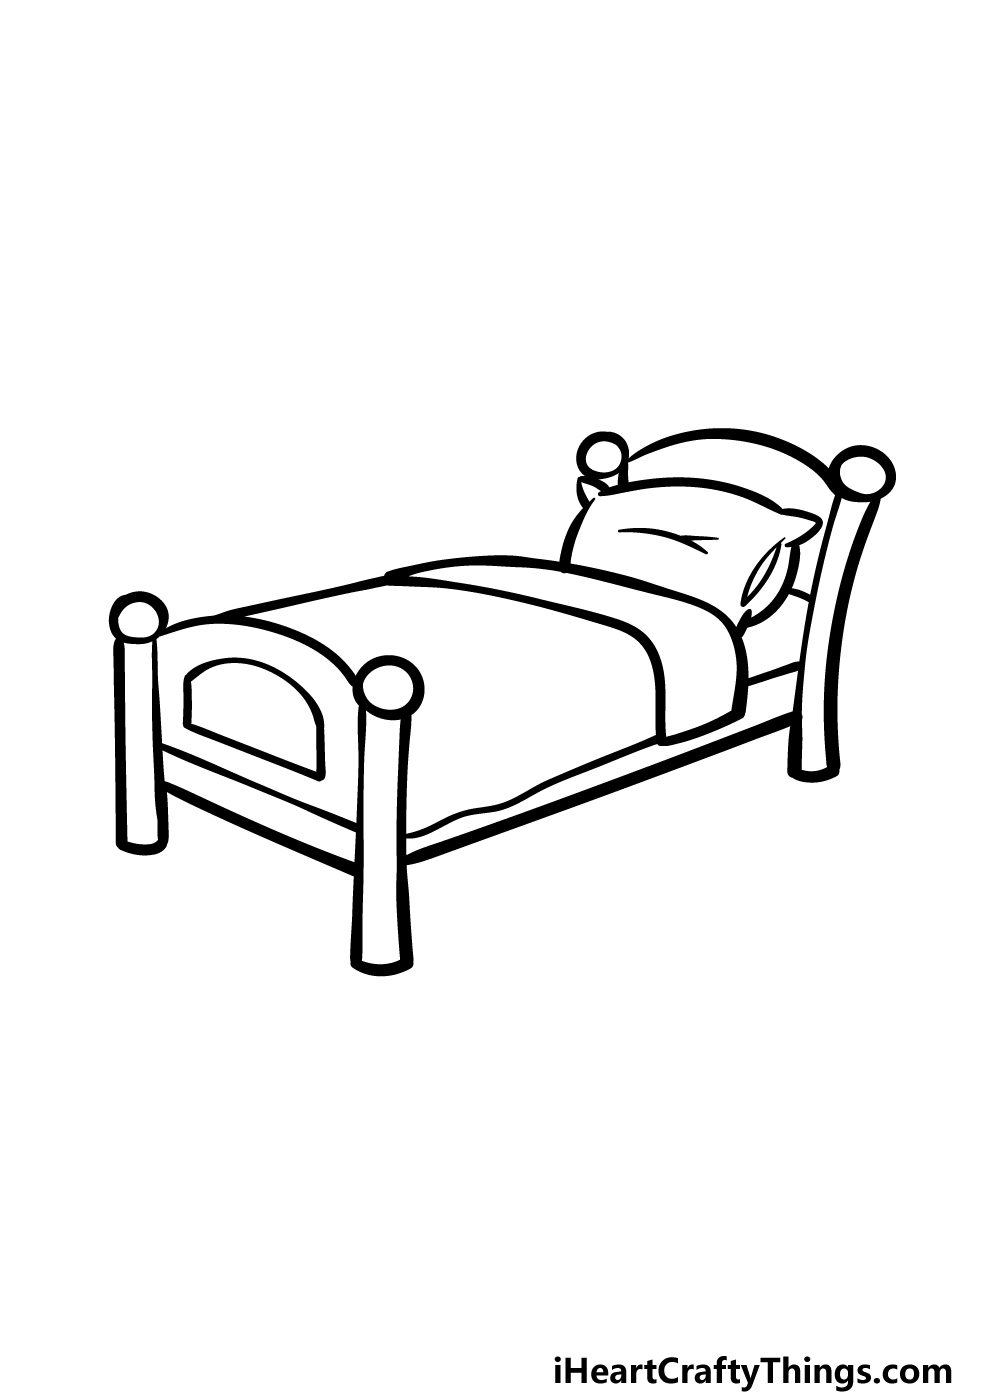 how to draw a cartoon bed step 7